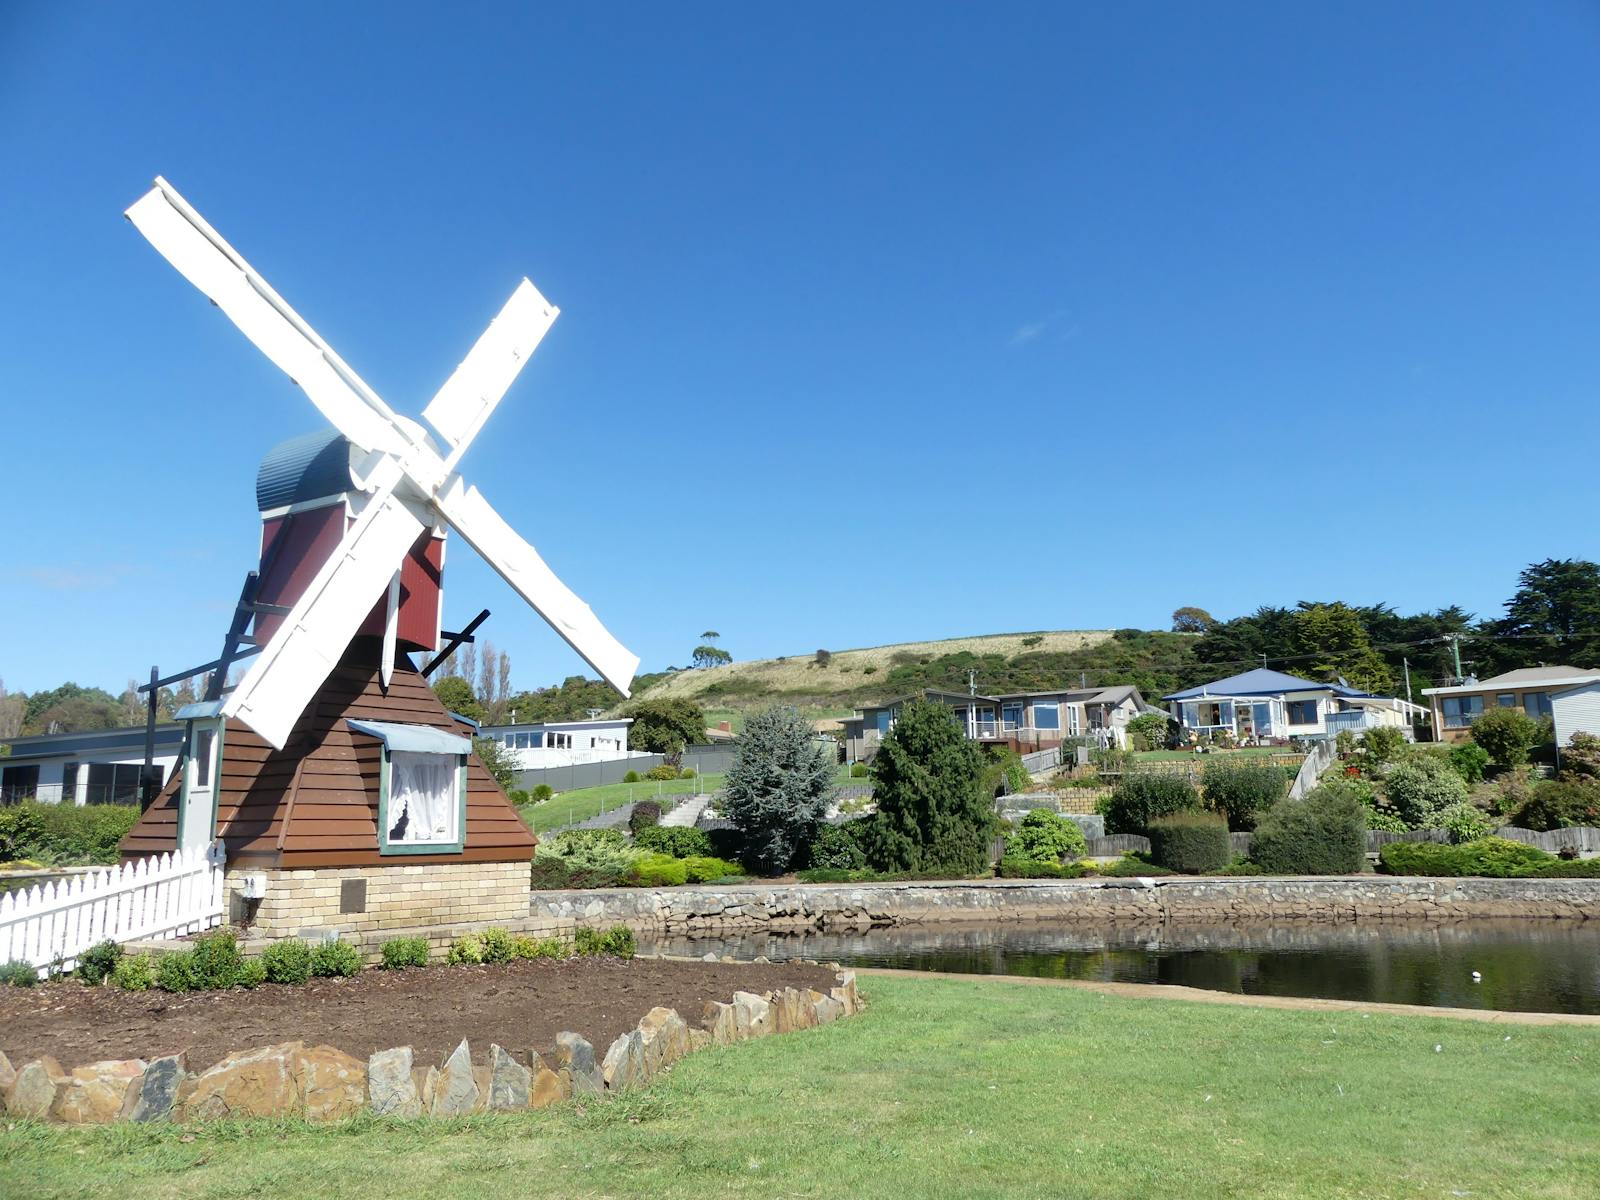 Donated by the Dutch community the mill pays tribute to their earliest settlers in Penguin Mill